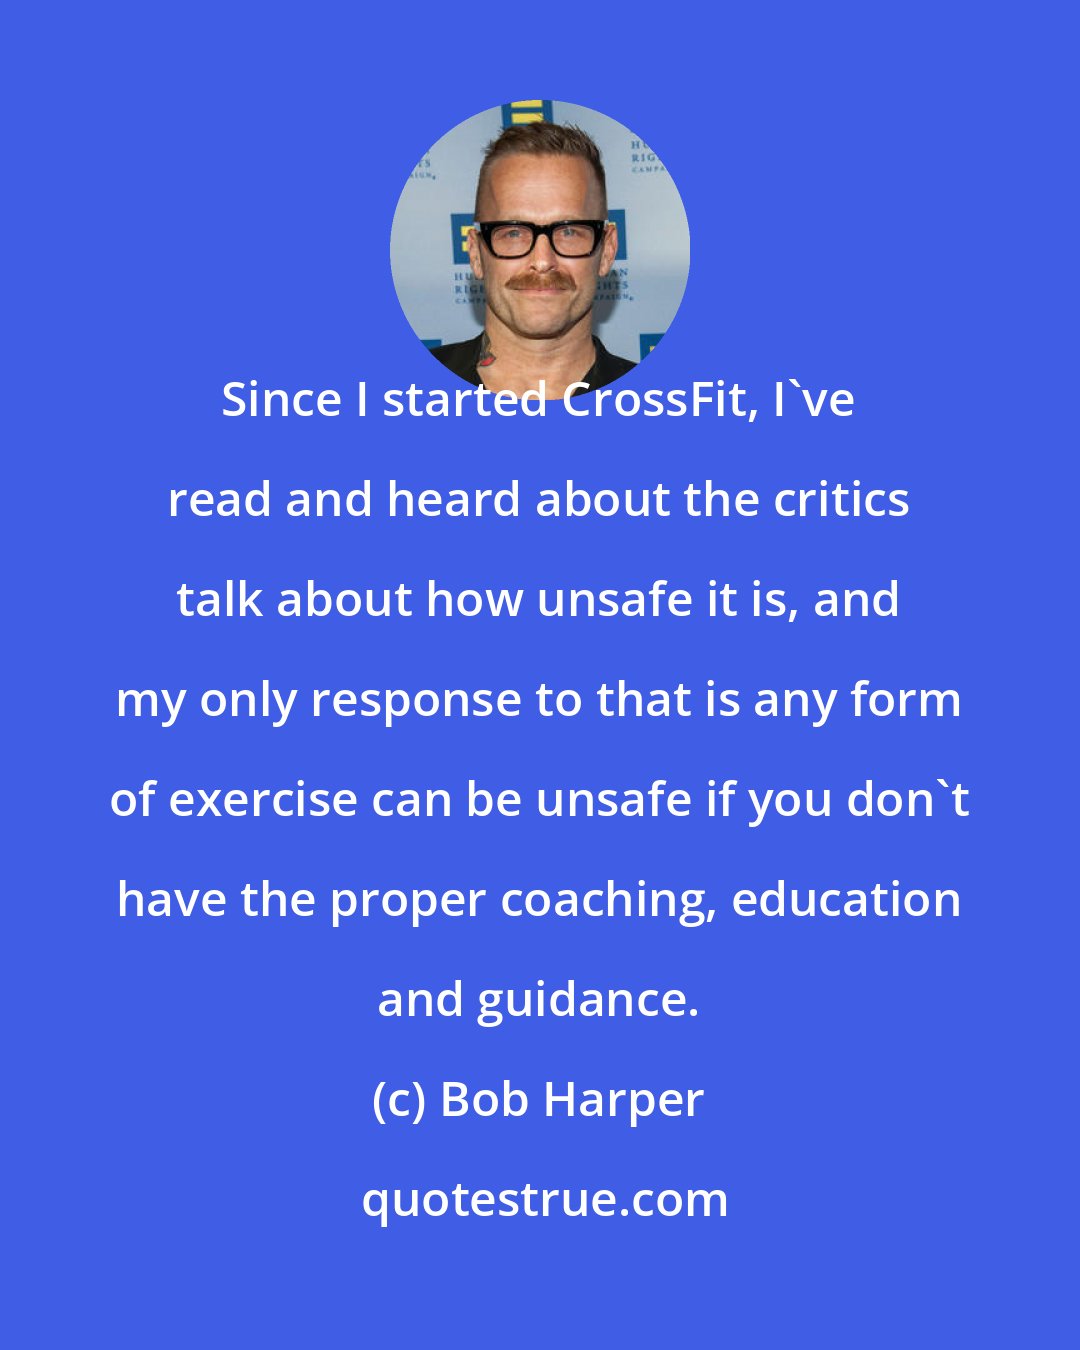 Bob Harper: Since I started CrossFit, I've read and heard about the critics talk about how unsafe it is, and my only response to that is any form of exercise can be unsafe if you don't have the proper coaching, education and guidance.